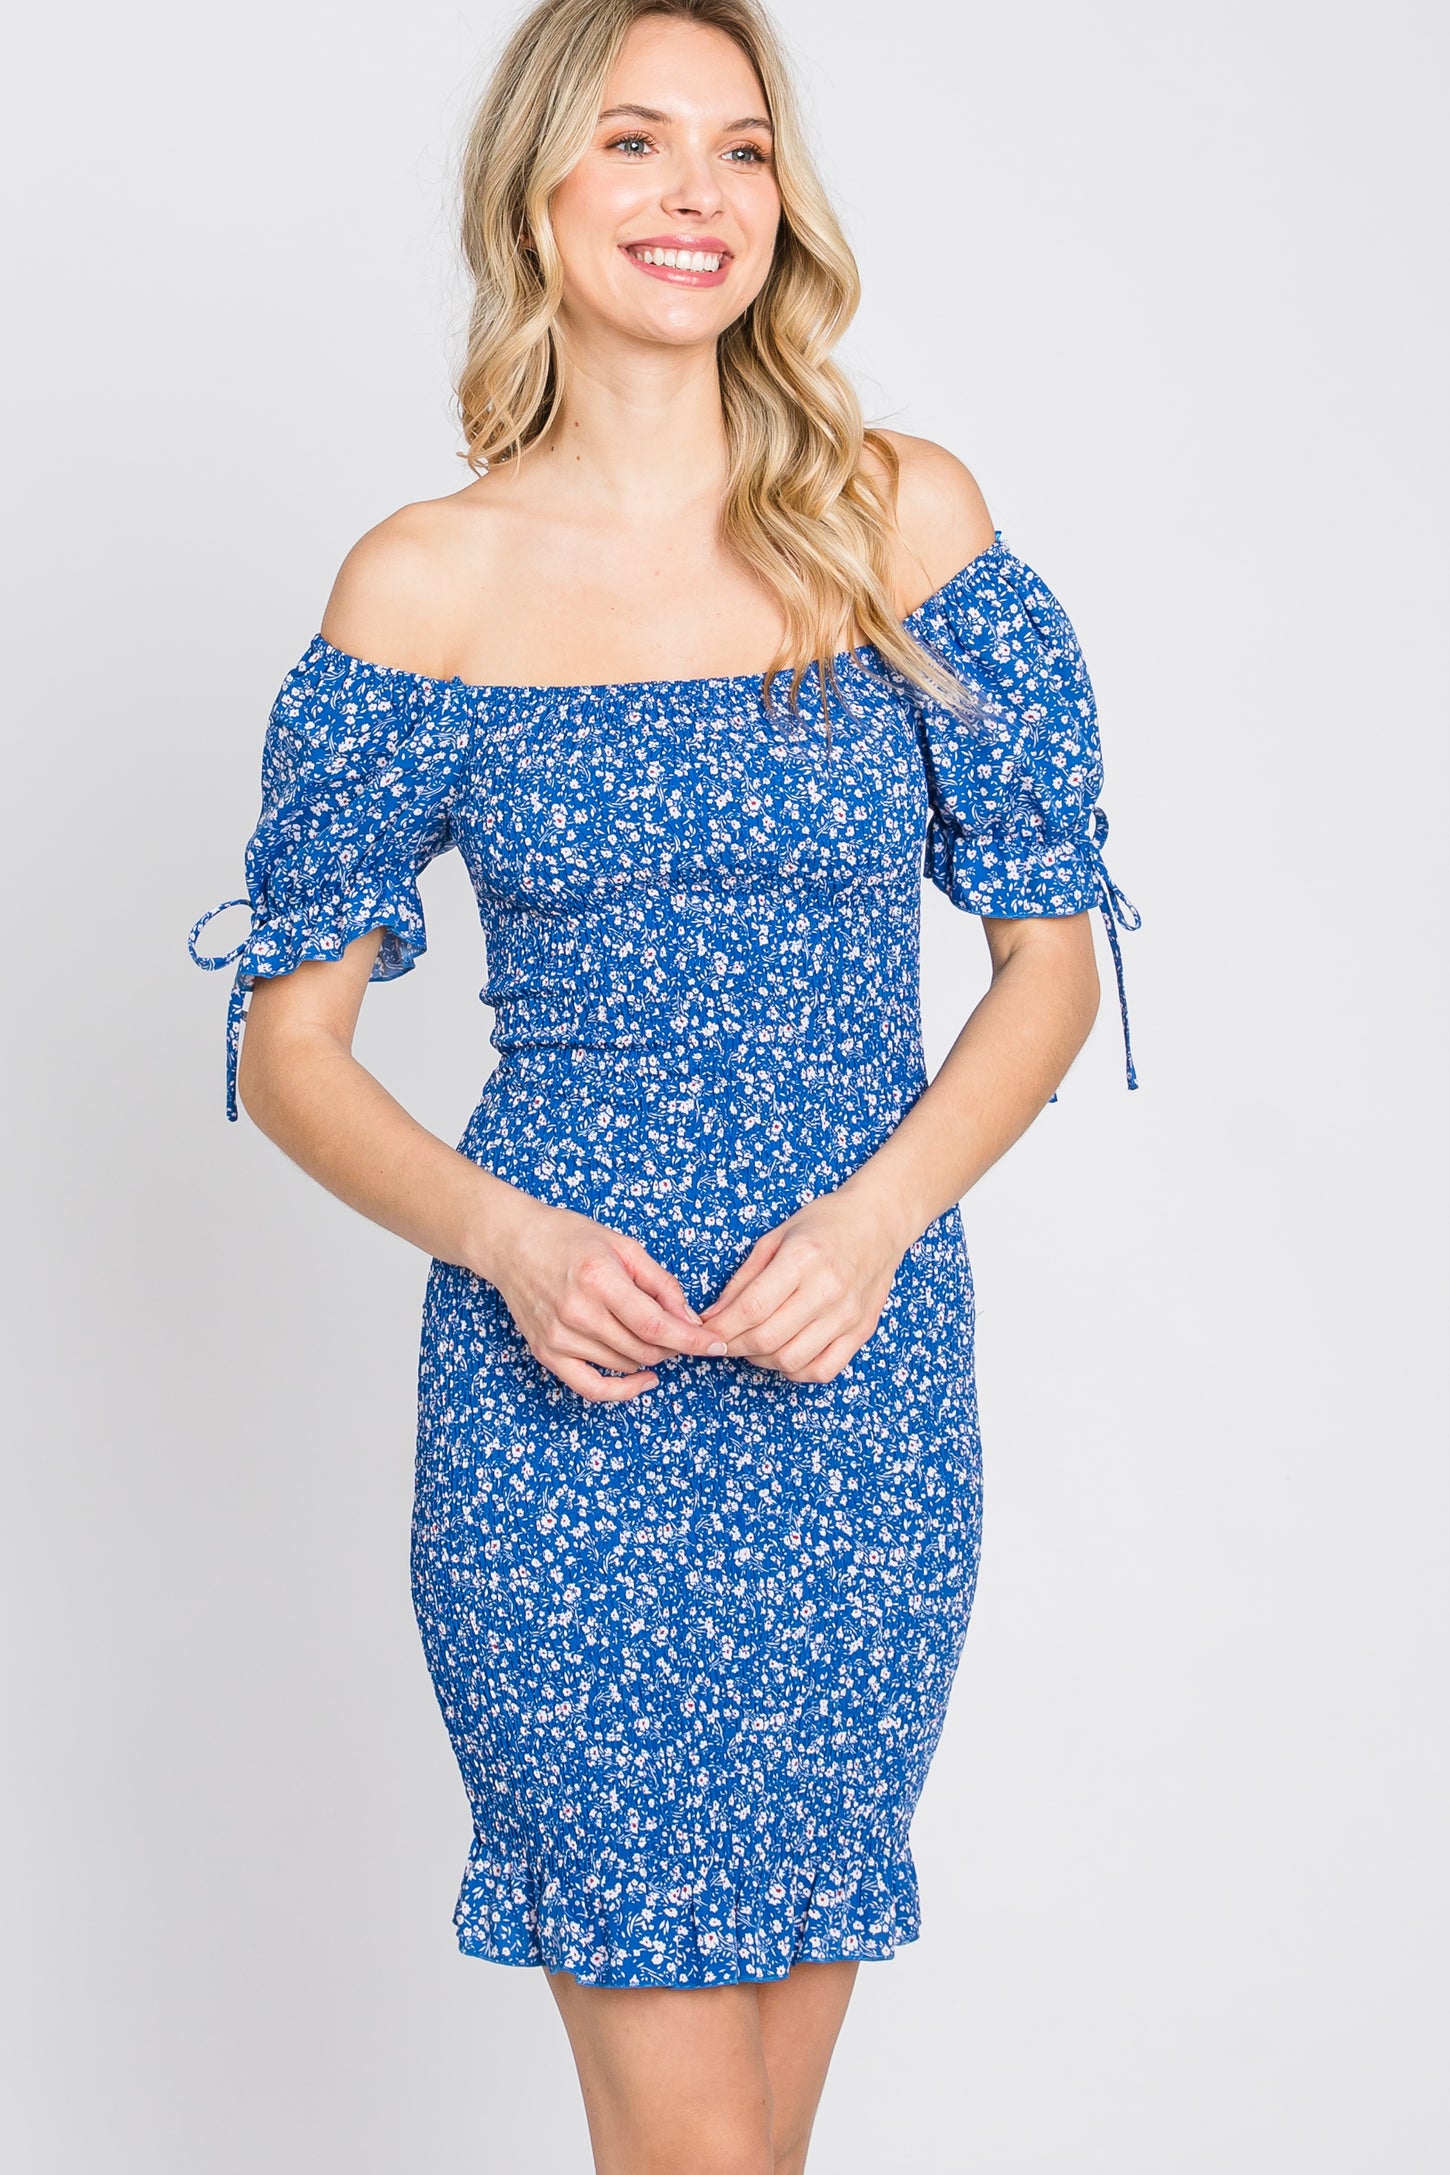 Royal Blue Floral Smocked Fitted Maternity Mini Dress– PinkBlush